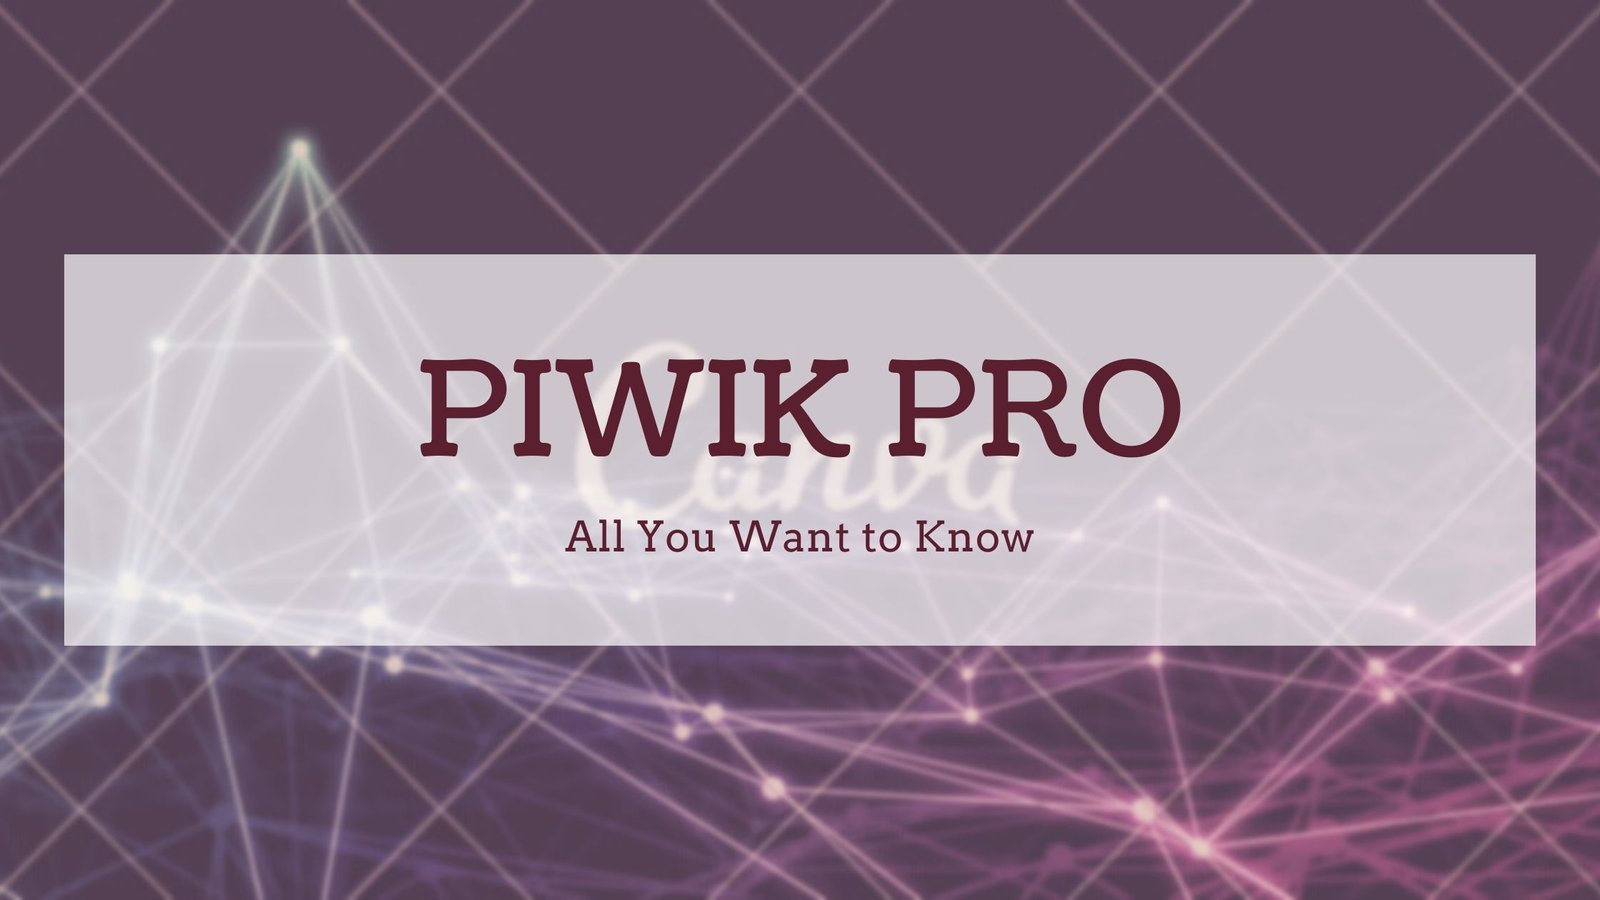 Piwik PRO Analytics Suite - All Products & Features Explained